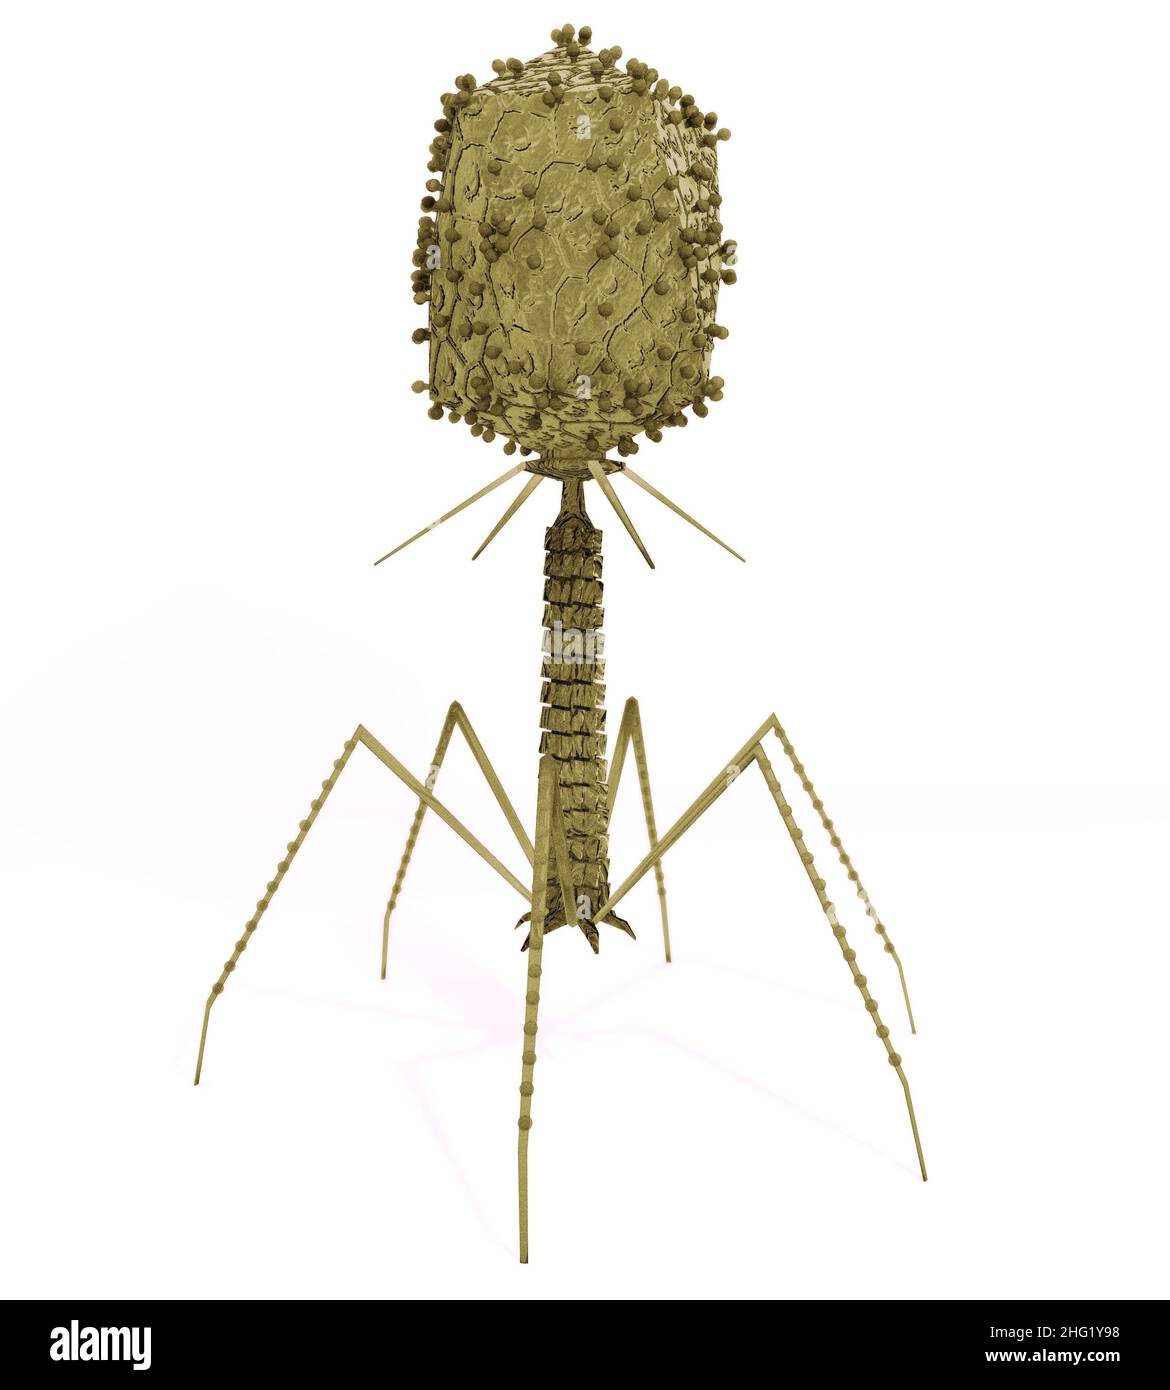 An up-close  illustration of Bacteriophage Viruses infecting bacteria. Stock Photo